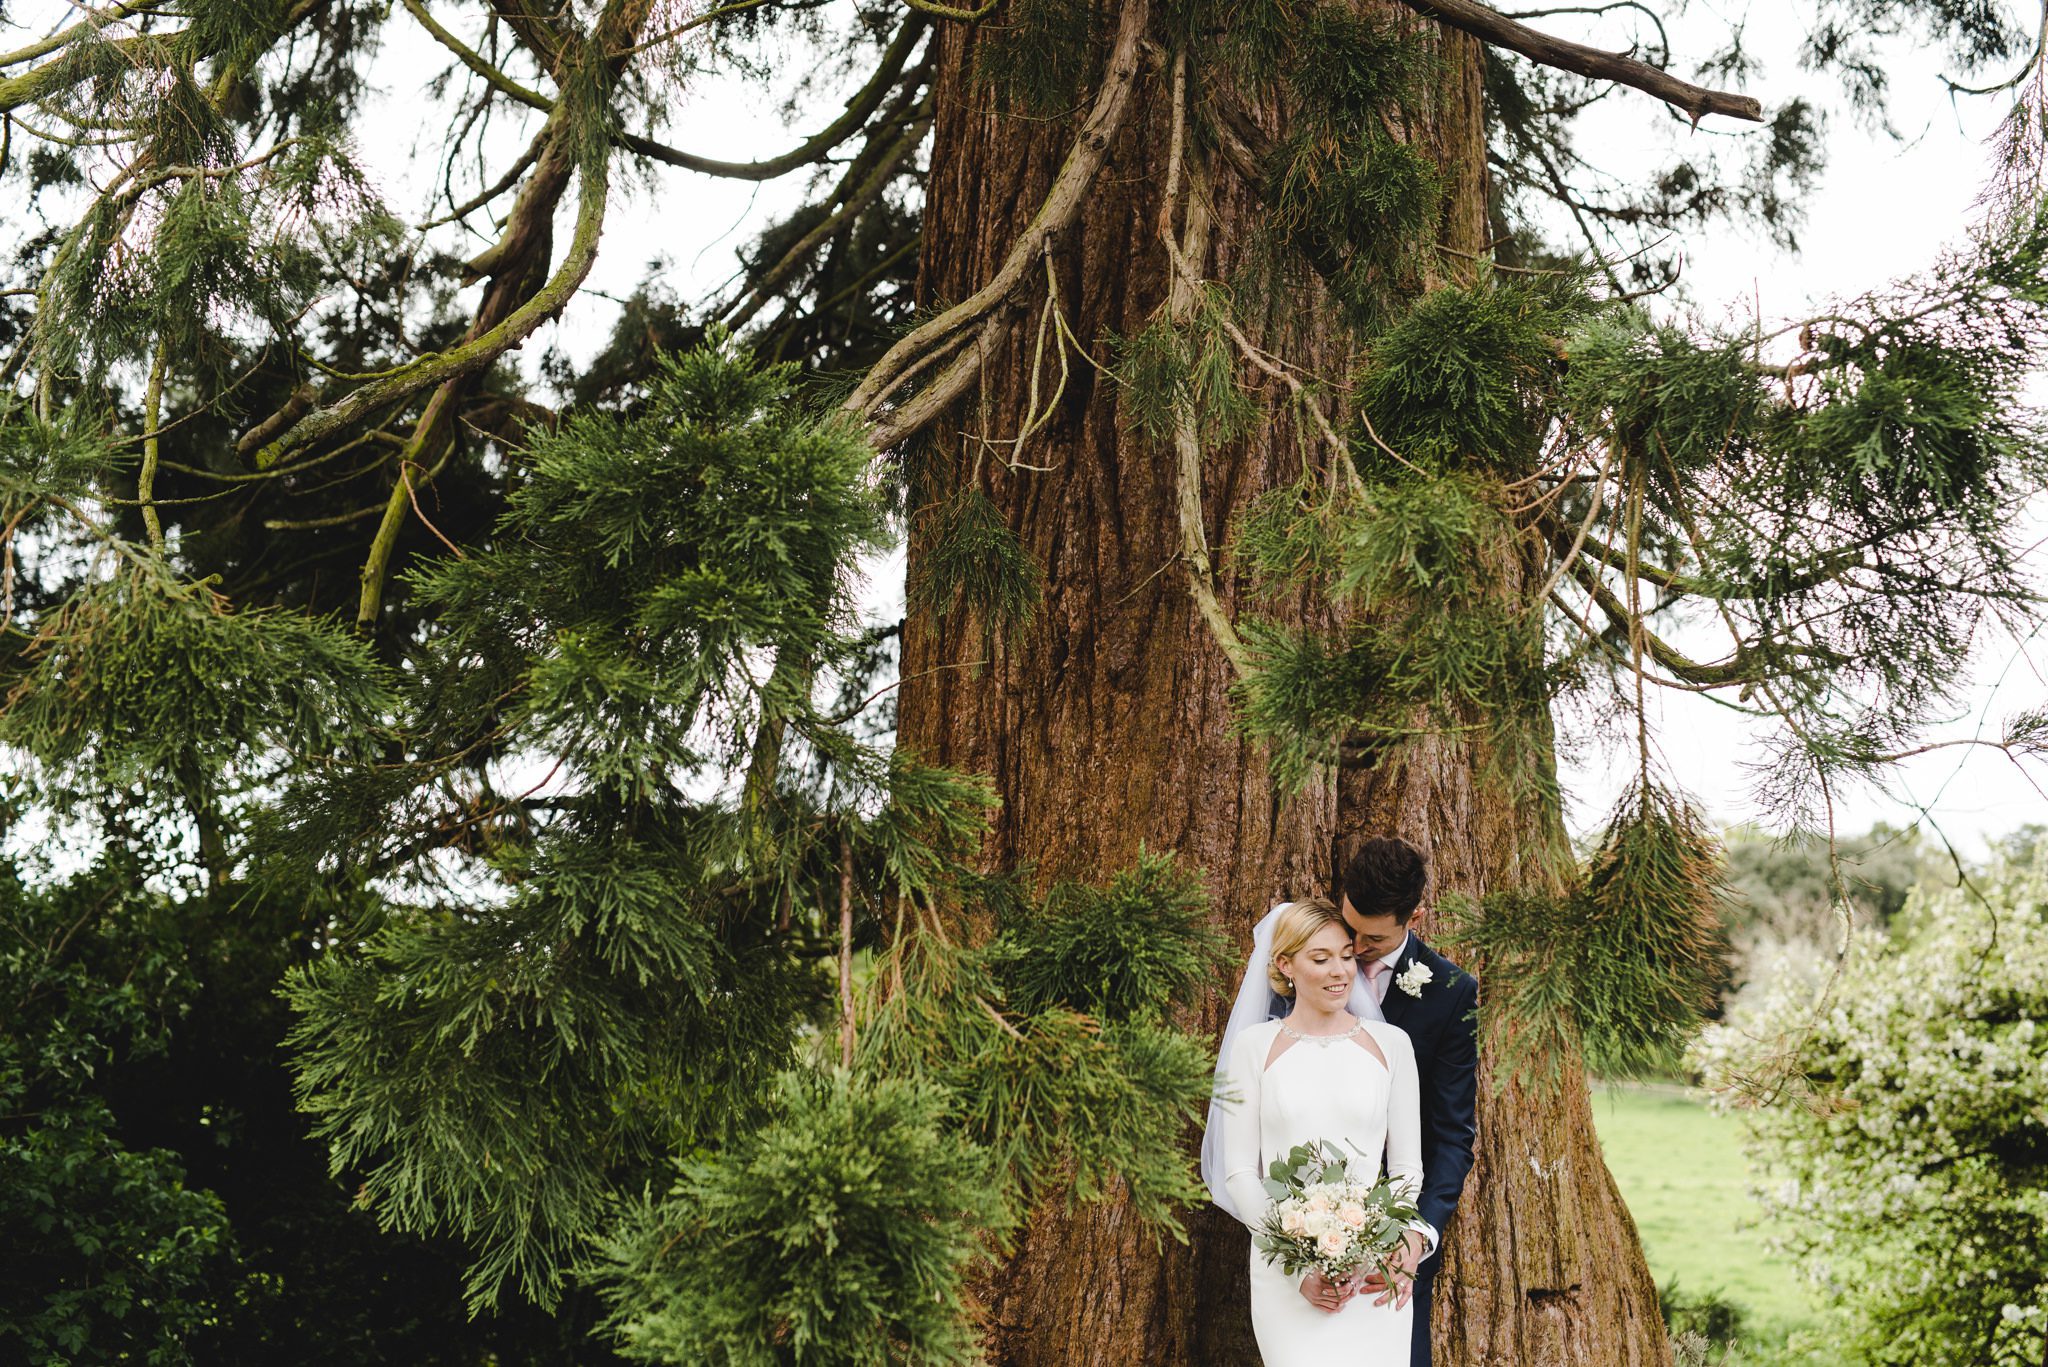 A bride and groom standing under a pine tree